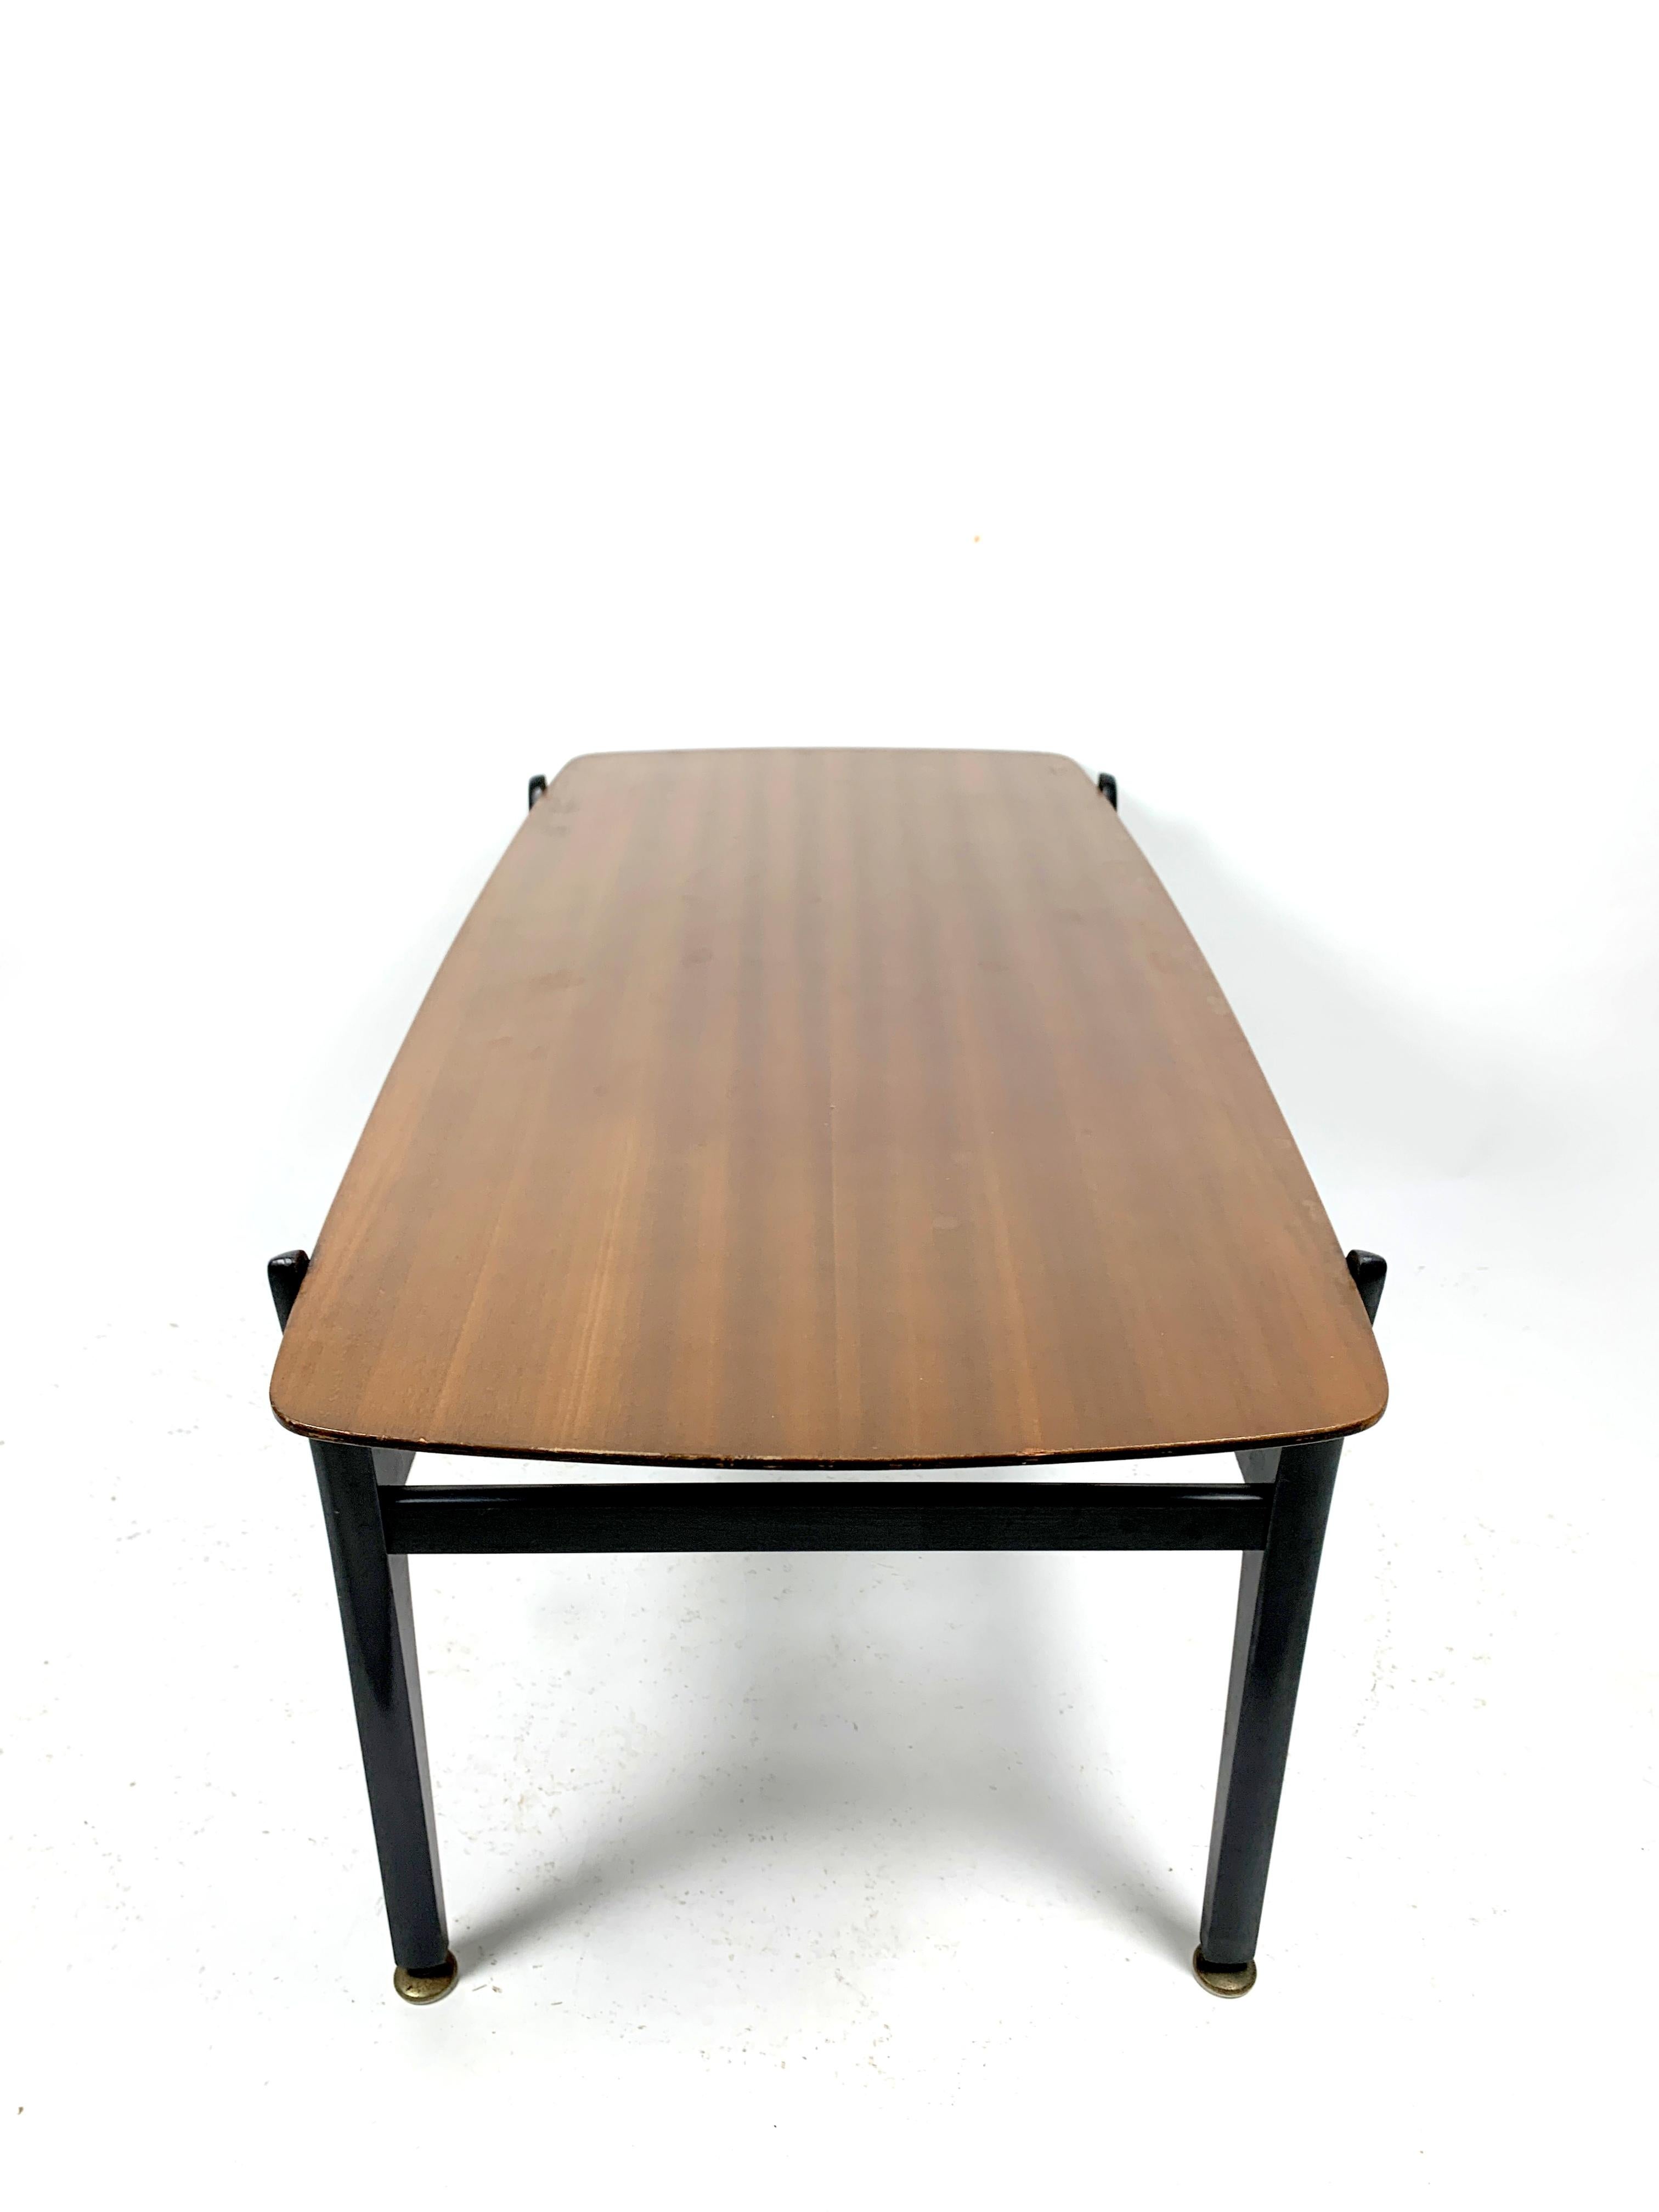 European Teak Coffee Table with Shelf by Nathan, 1970